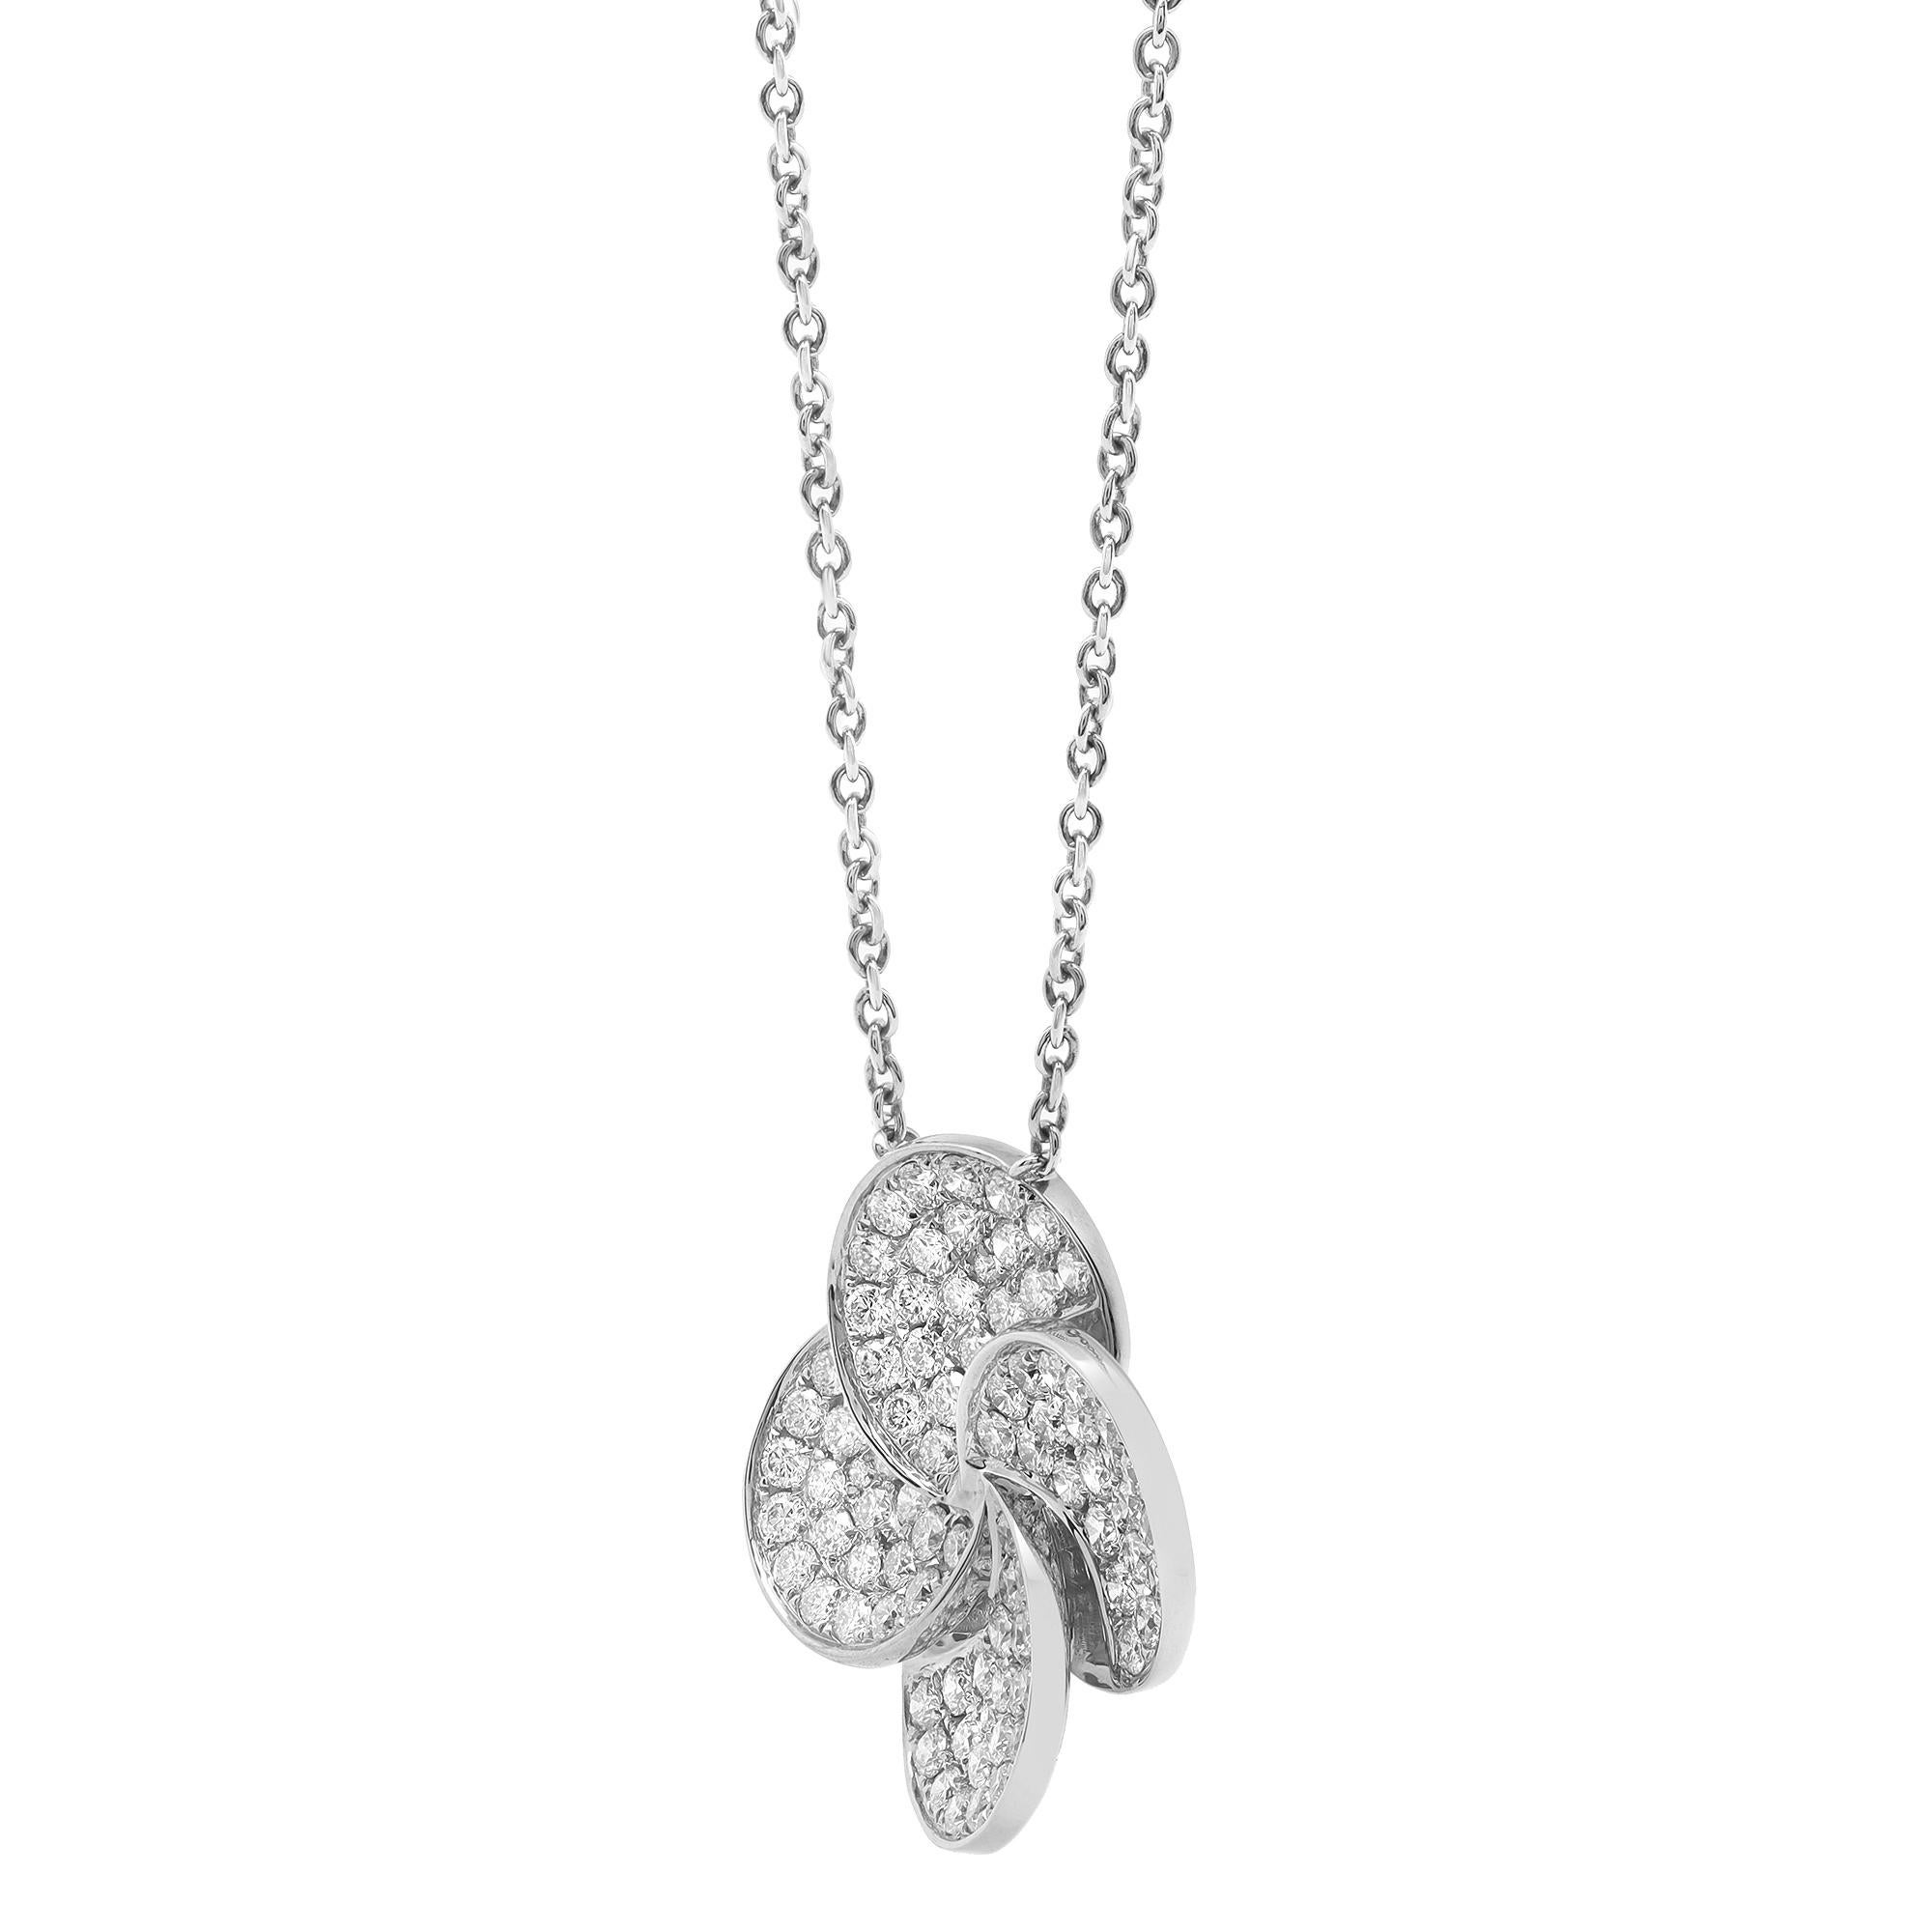 This fabulous dazzling diamond flower pendant necklace is a perfect accent to every day and evening look and gives a touch of chic to any ensemble you pair it with. It features pave set round brilliant cut diamonds weighing 1.76 carats. Diamond